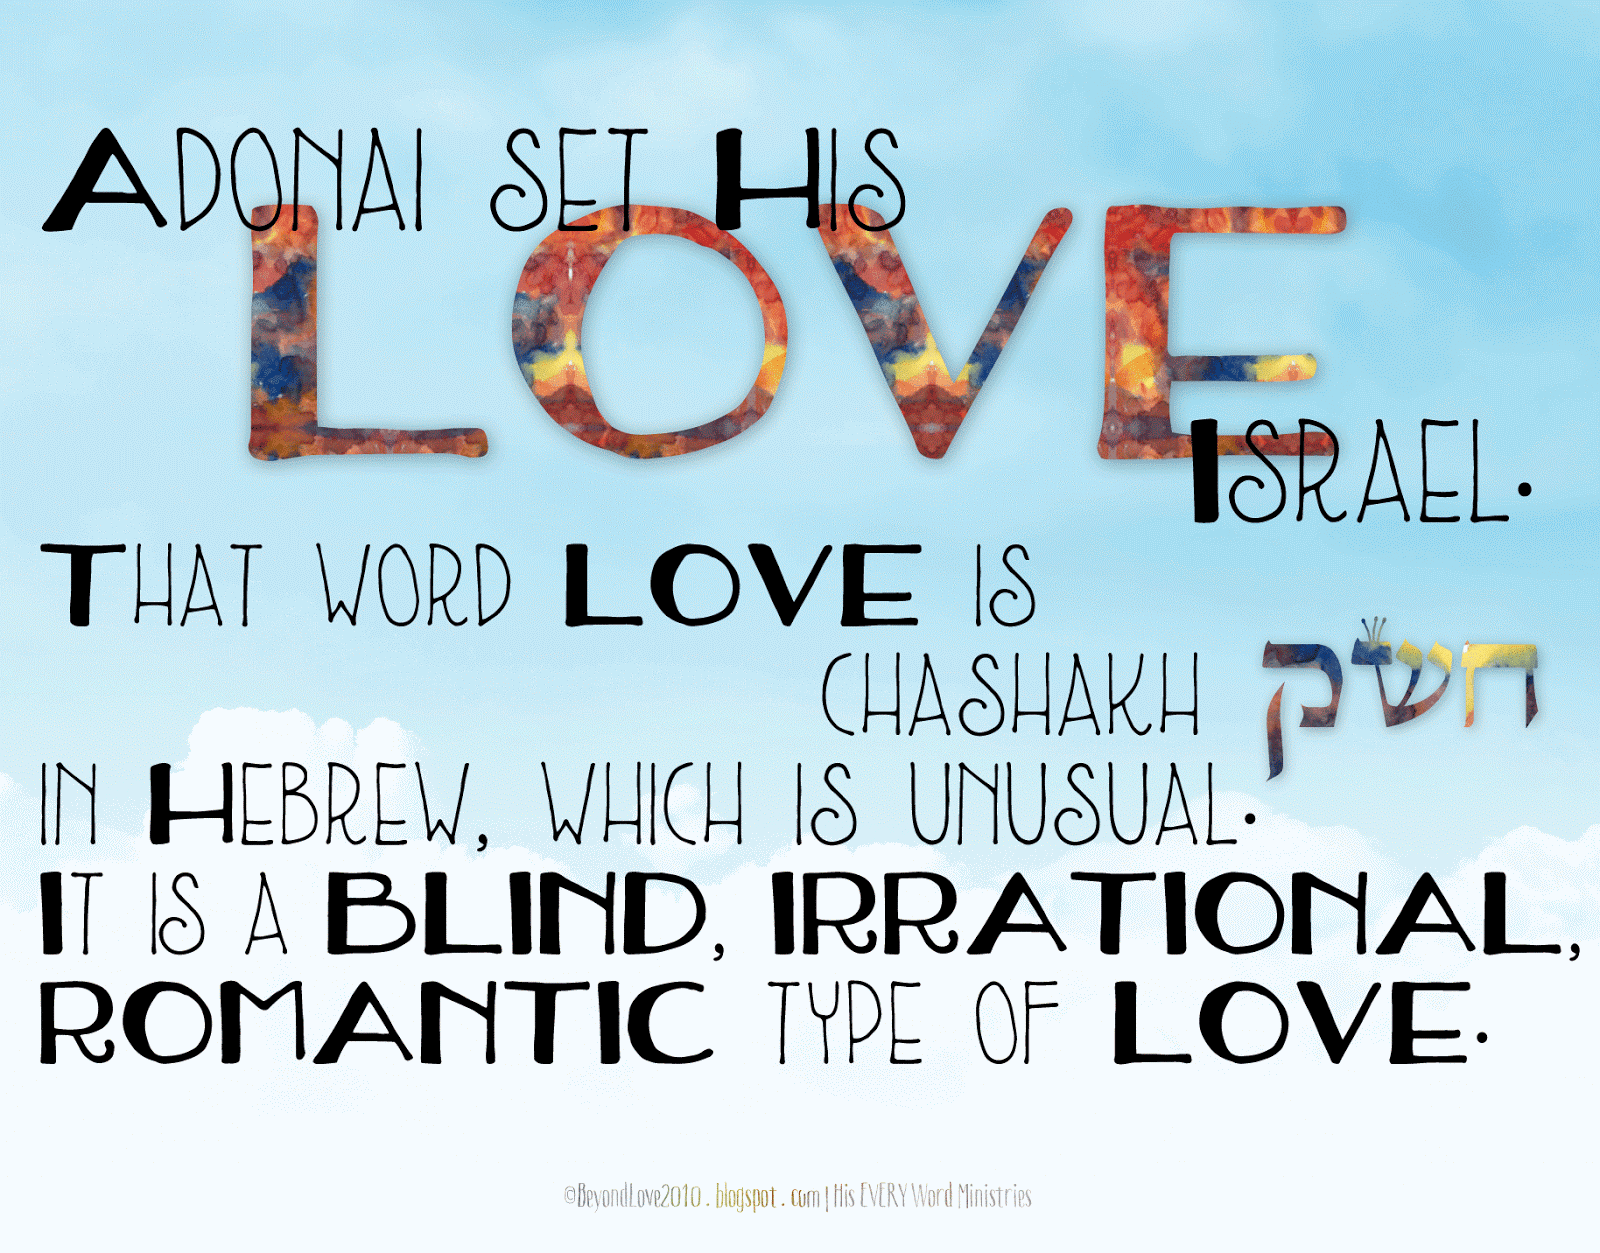 Adonai set His love on Israel That word love is chashakh ×—×©×§ in Hebrew which is unusual It is a blind irrational romantic type of love